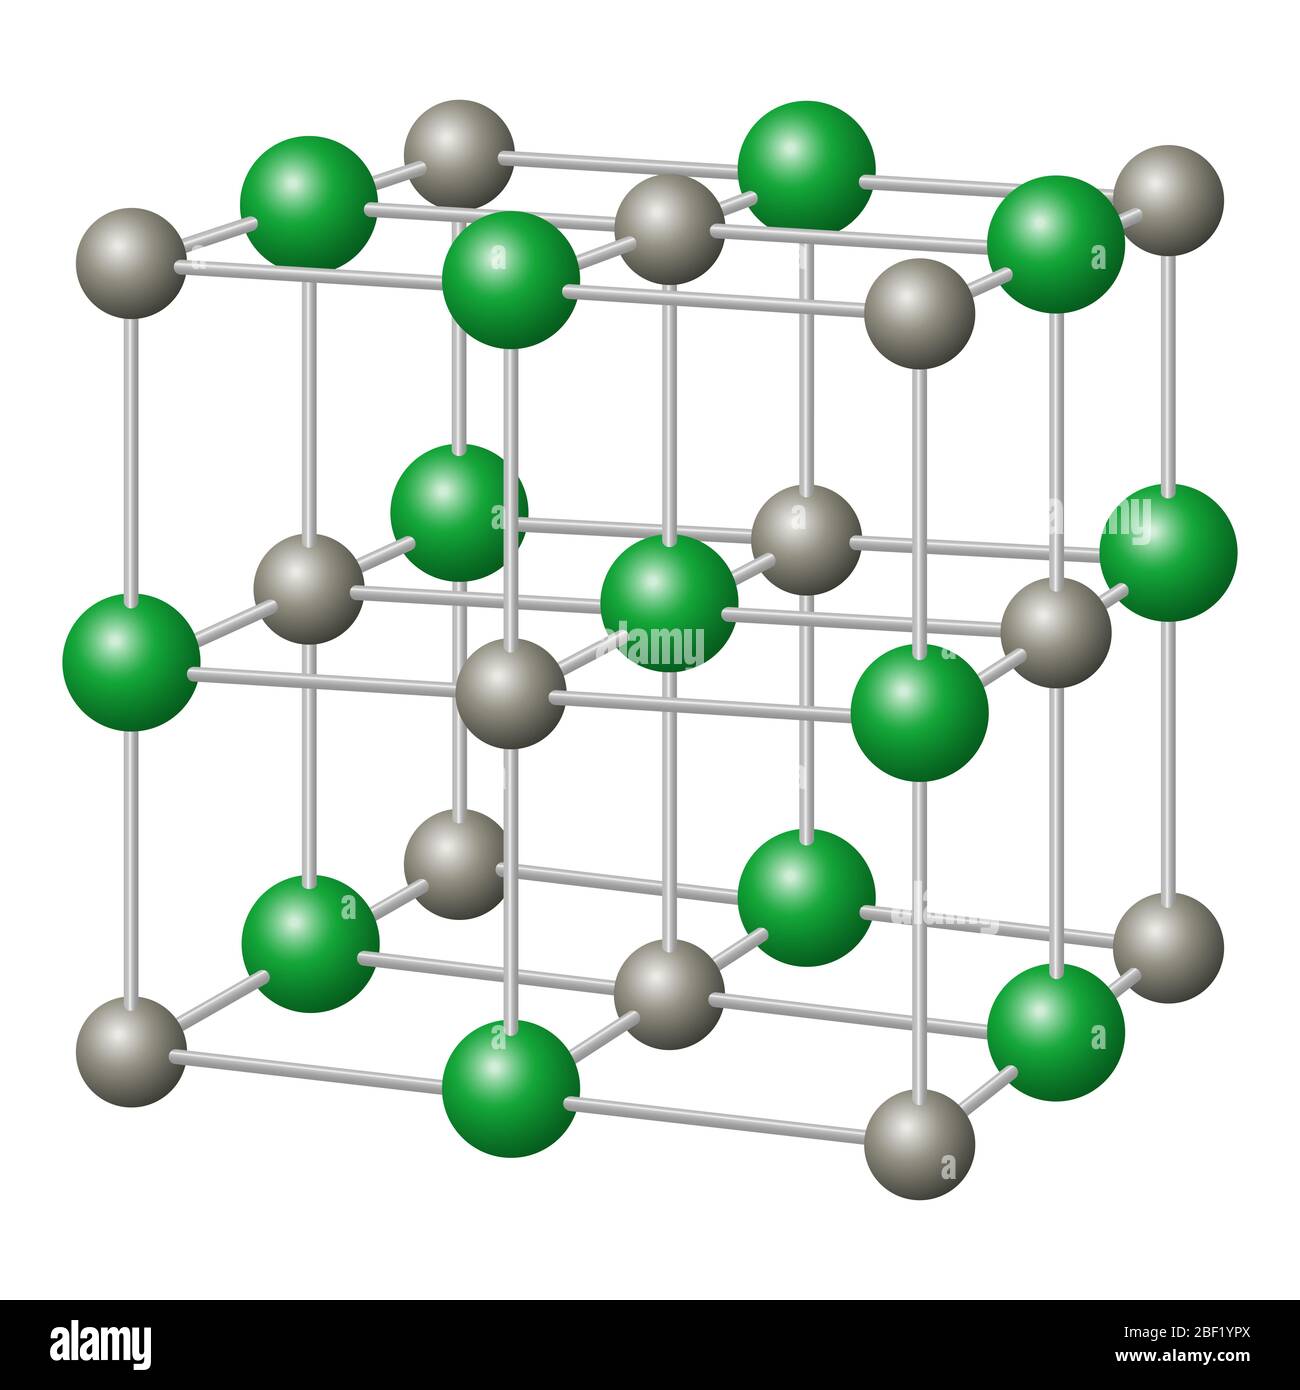 https://c8.alamy.com/comp/2BF1YPX/sodium-chloride-nacl-crystal-structure-with-sodium-in-gray-and-chloride-in-green-chemical-compound-edible-as-table-salt-2BF1YPX.jpg